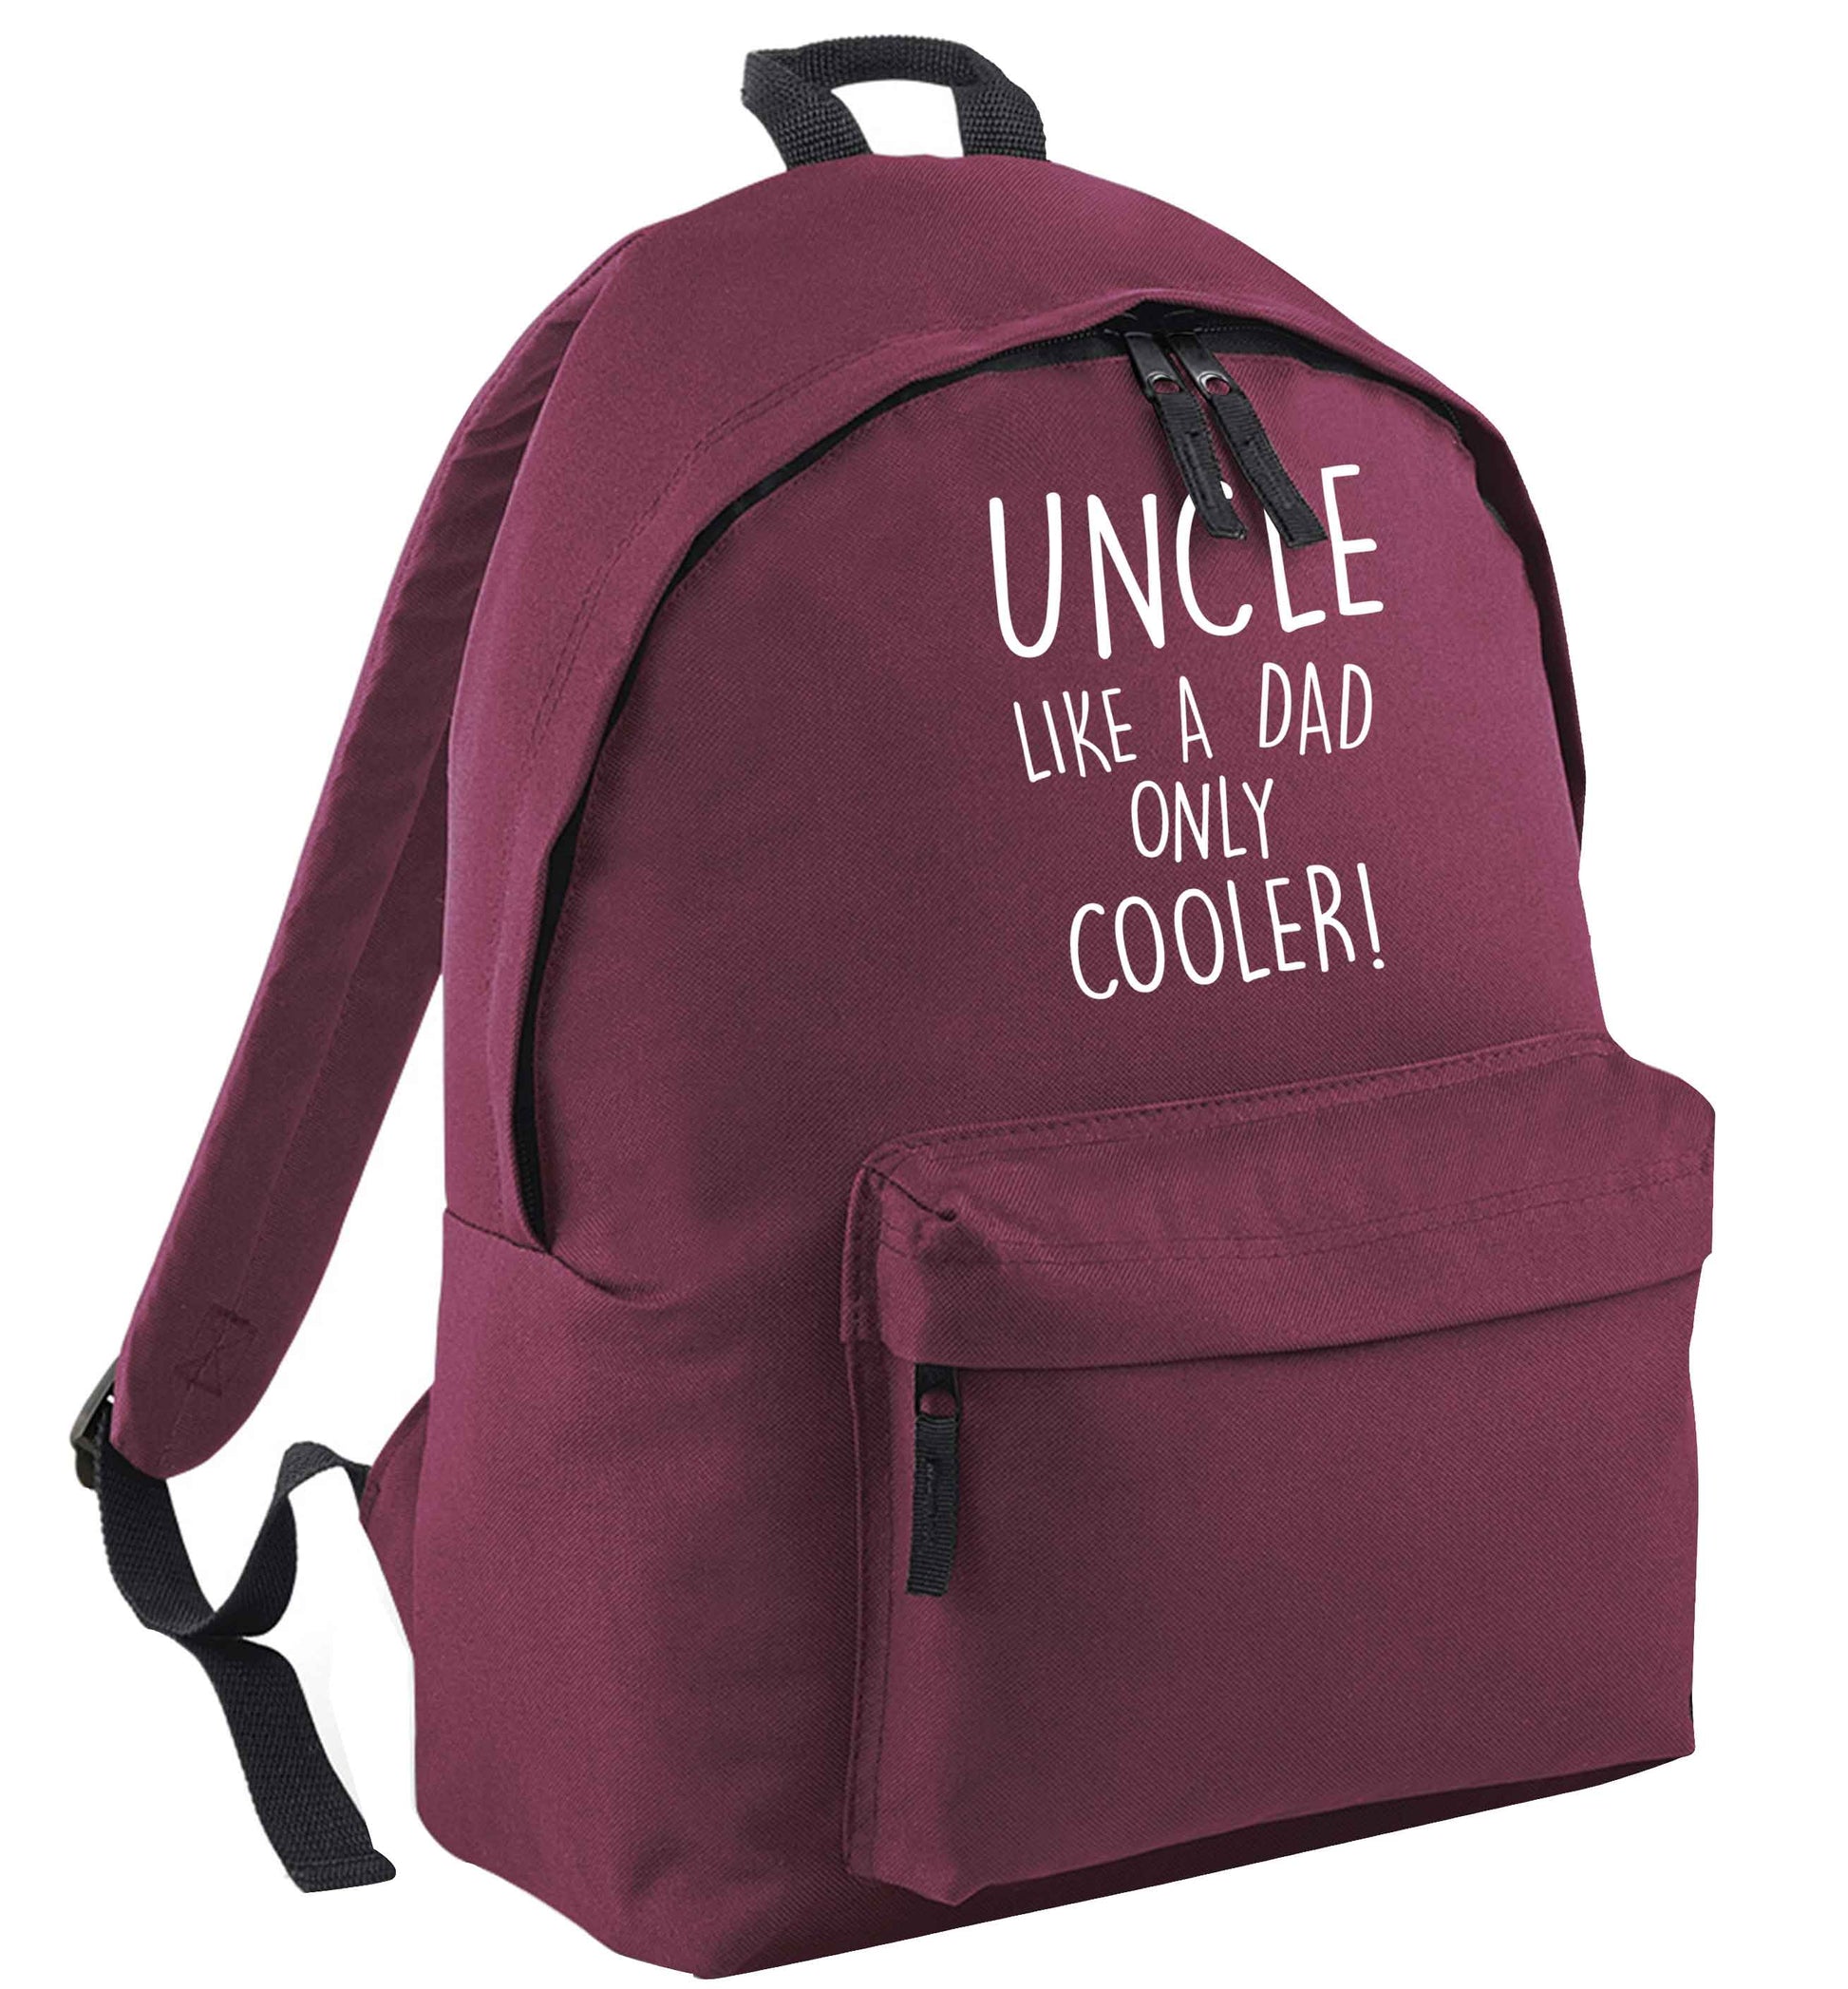 Uncle like a dad only cooler maroon adults backpack